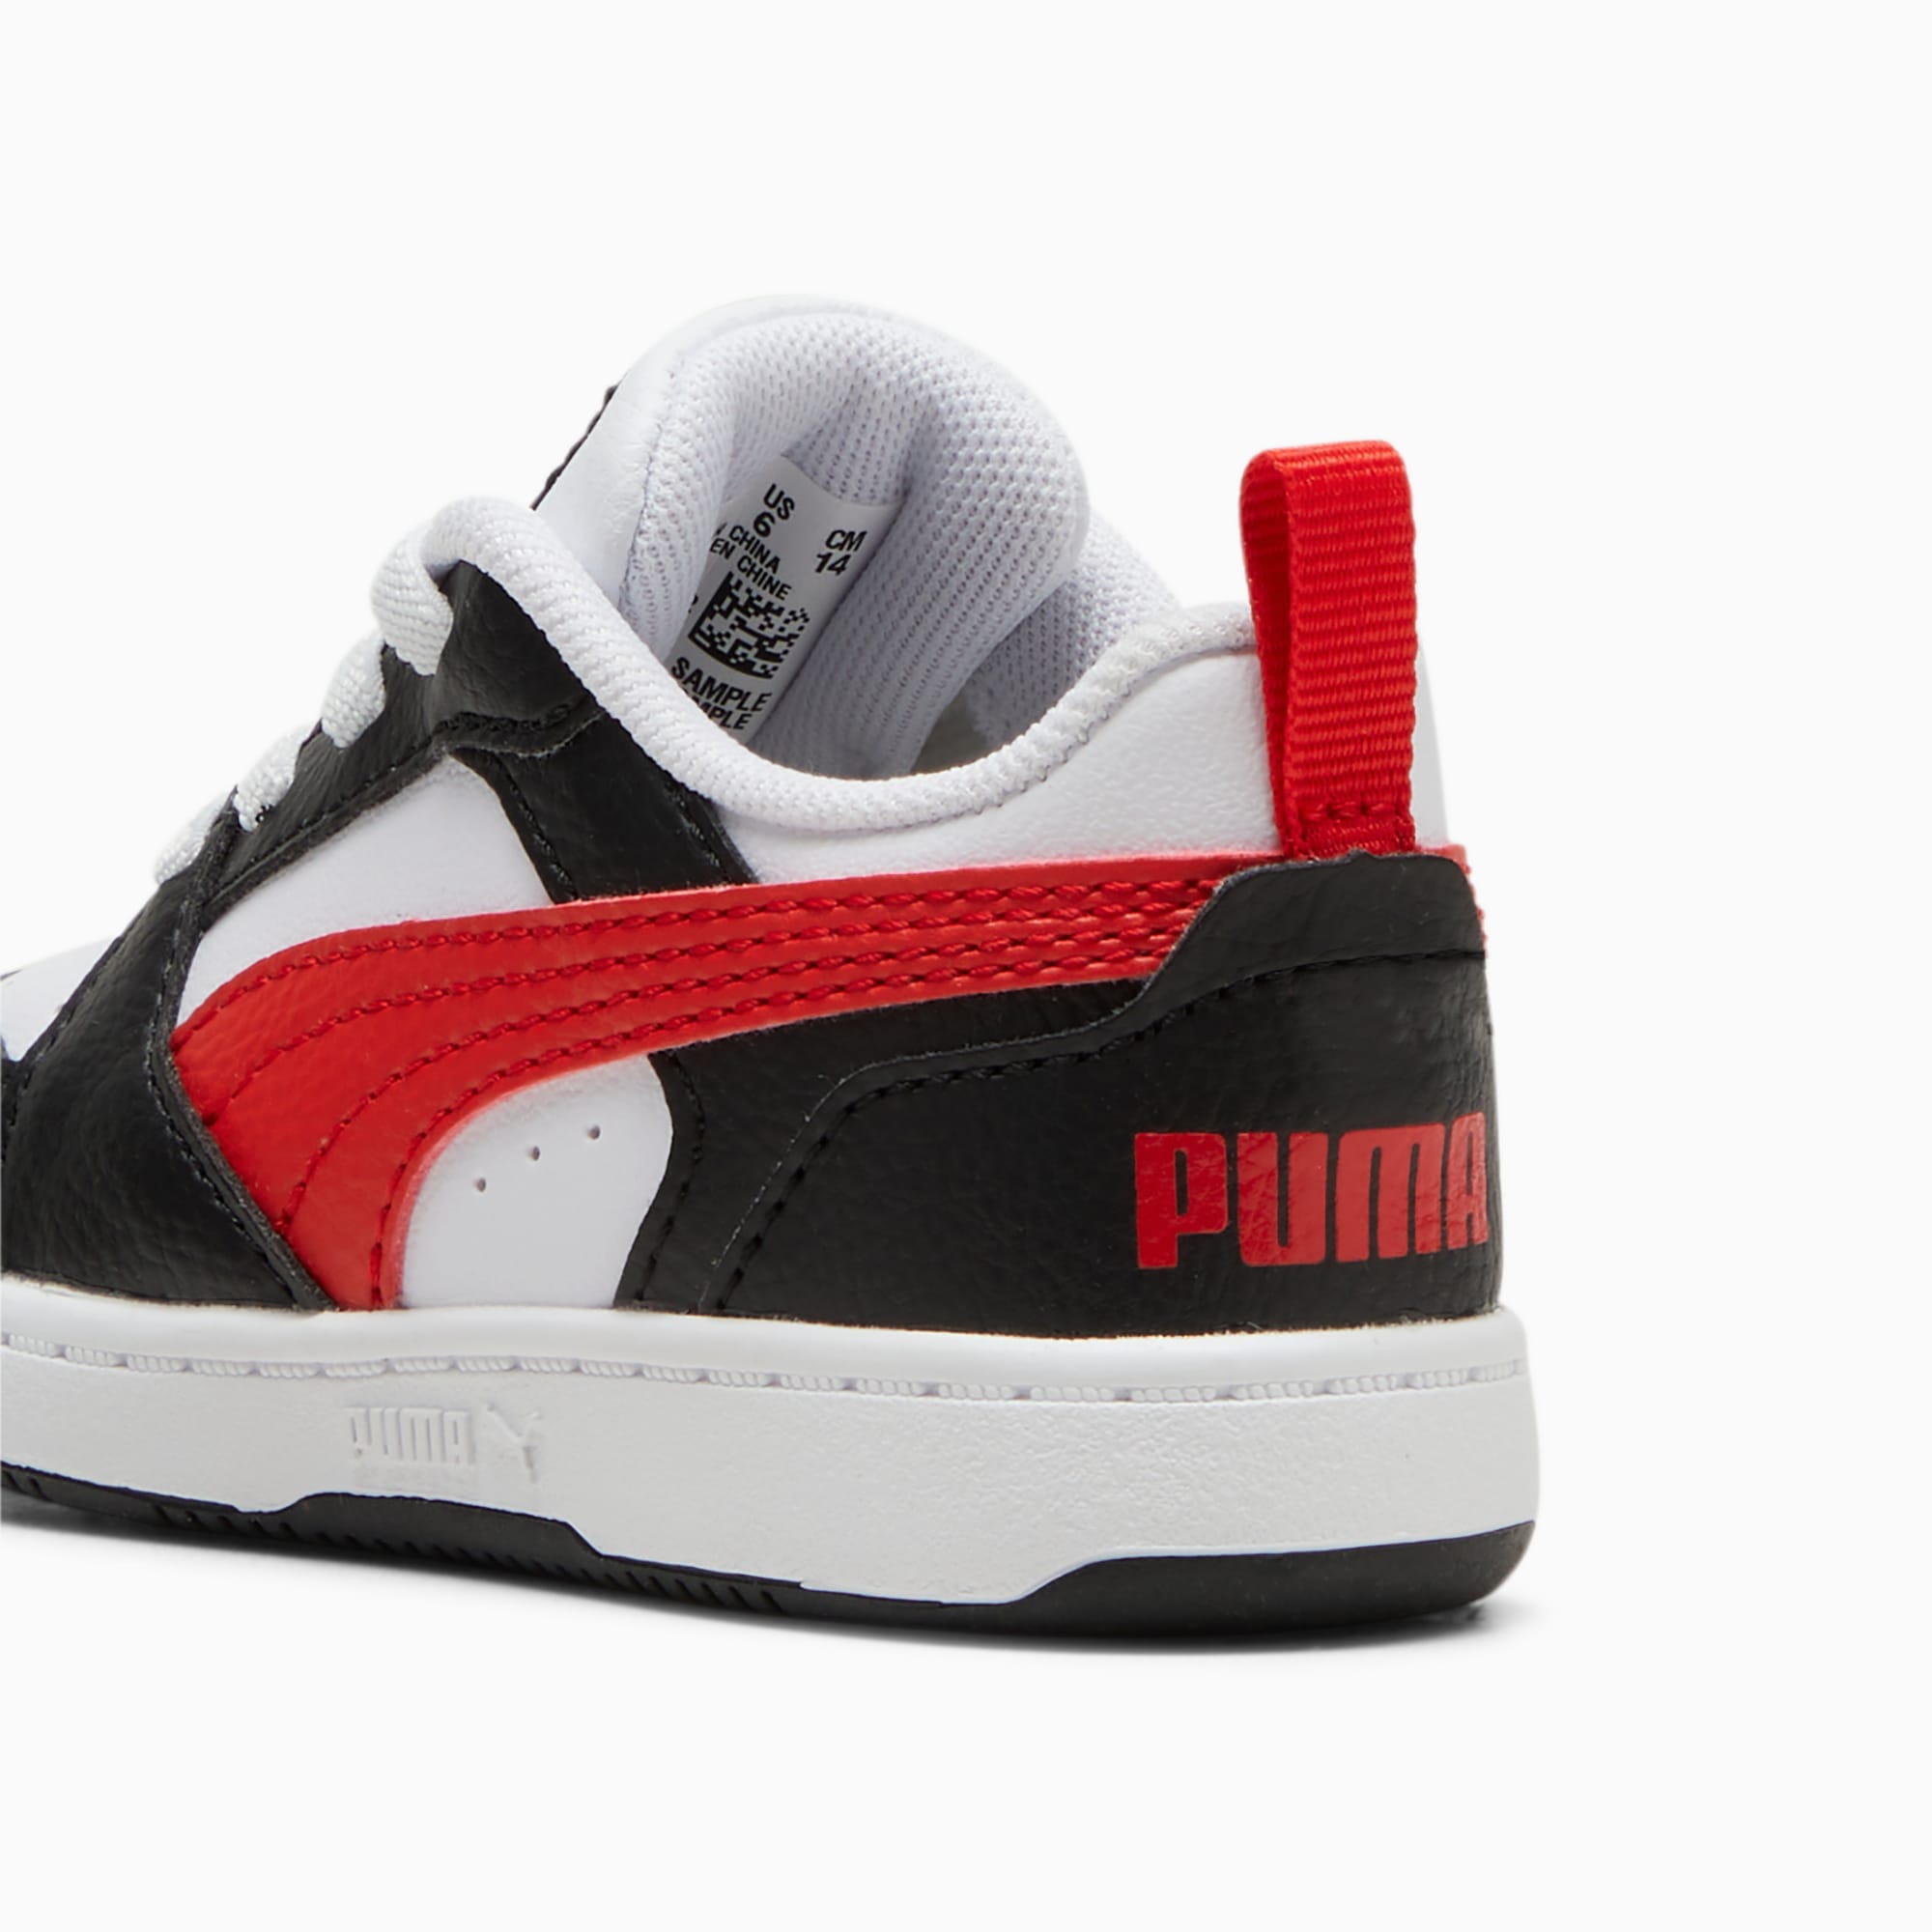 PUMA Rebound V6 Lo Toddlers' Sneakers, White/For All Time Red/Black, Size 19, Shoes